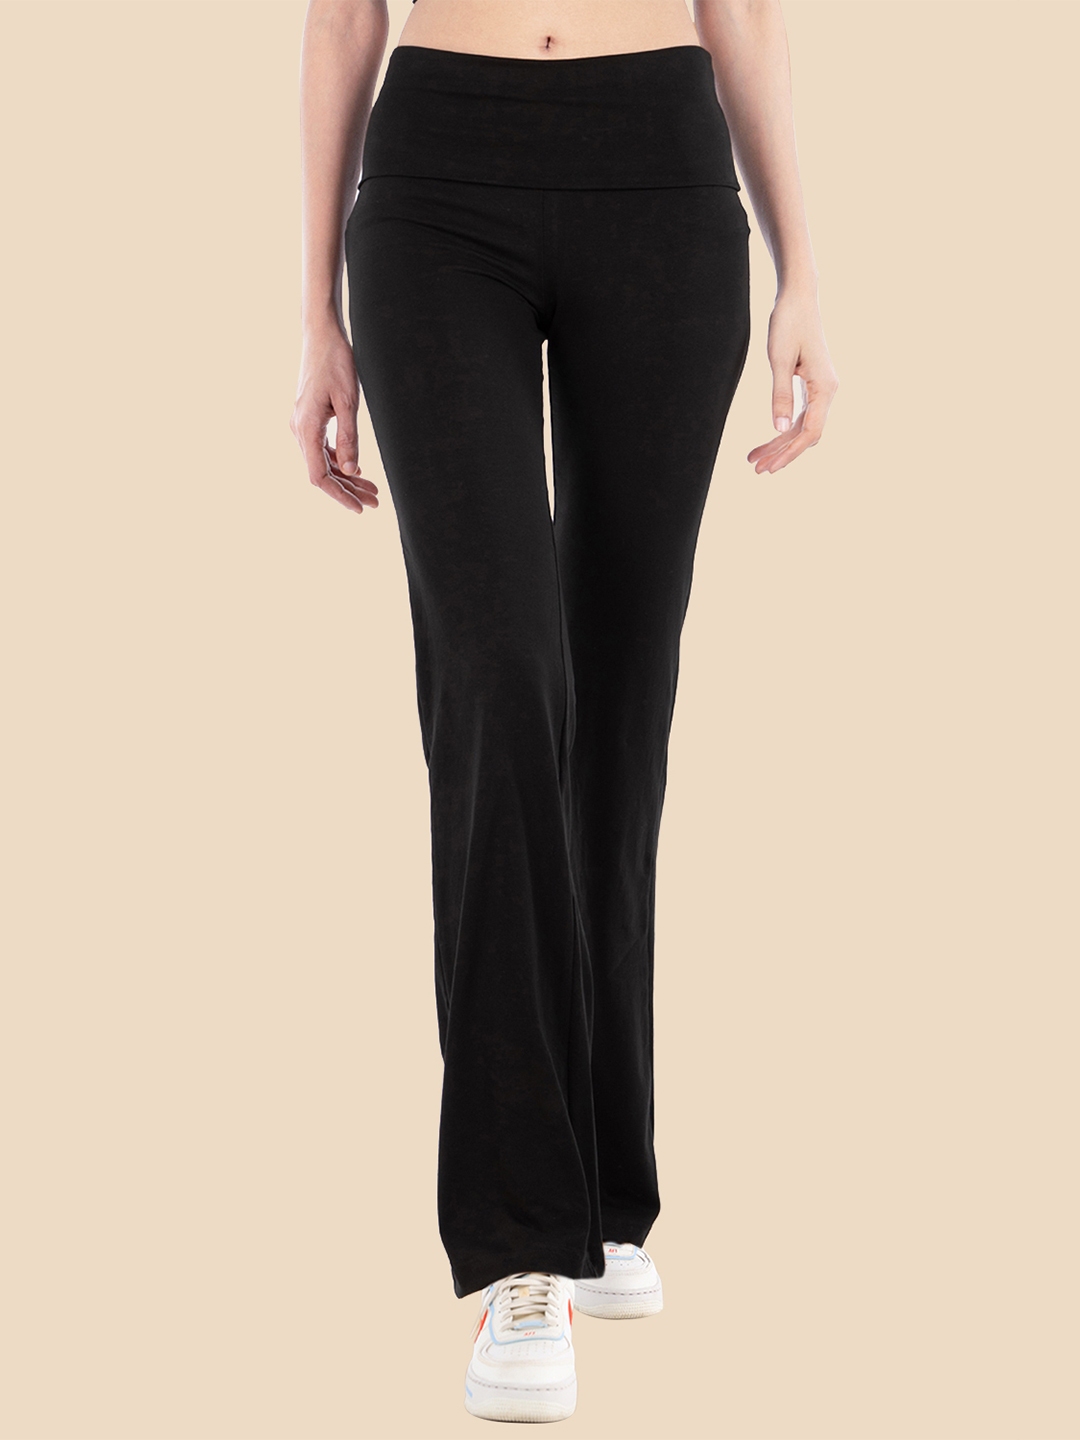 Womens Yoga Leggings Step On Foot Solid Color Ribbed Trousers